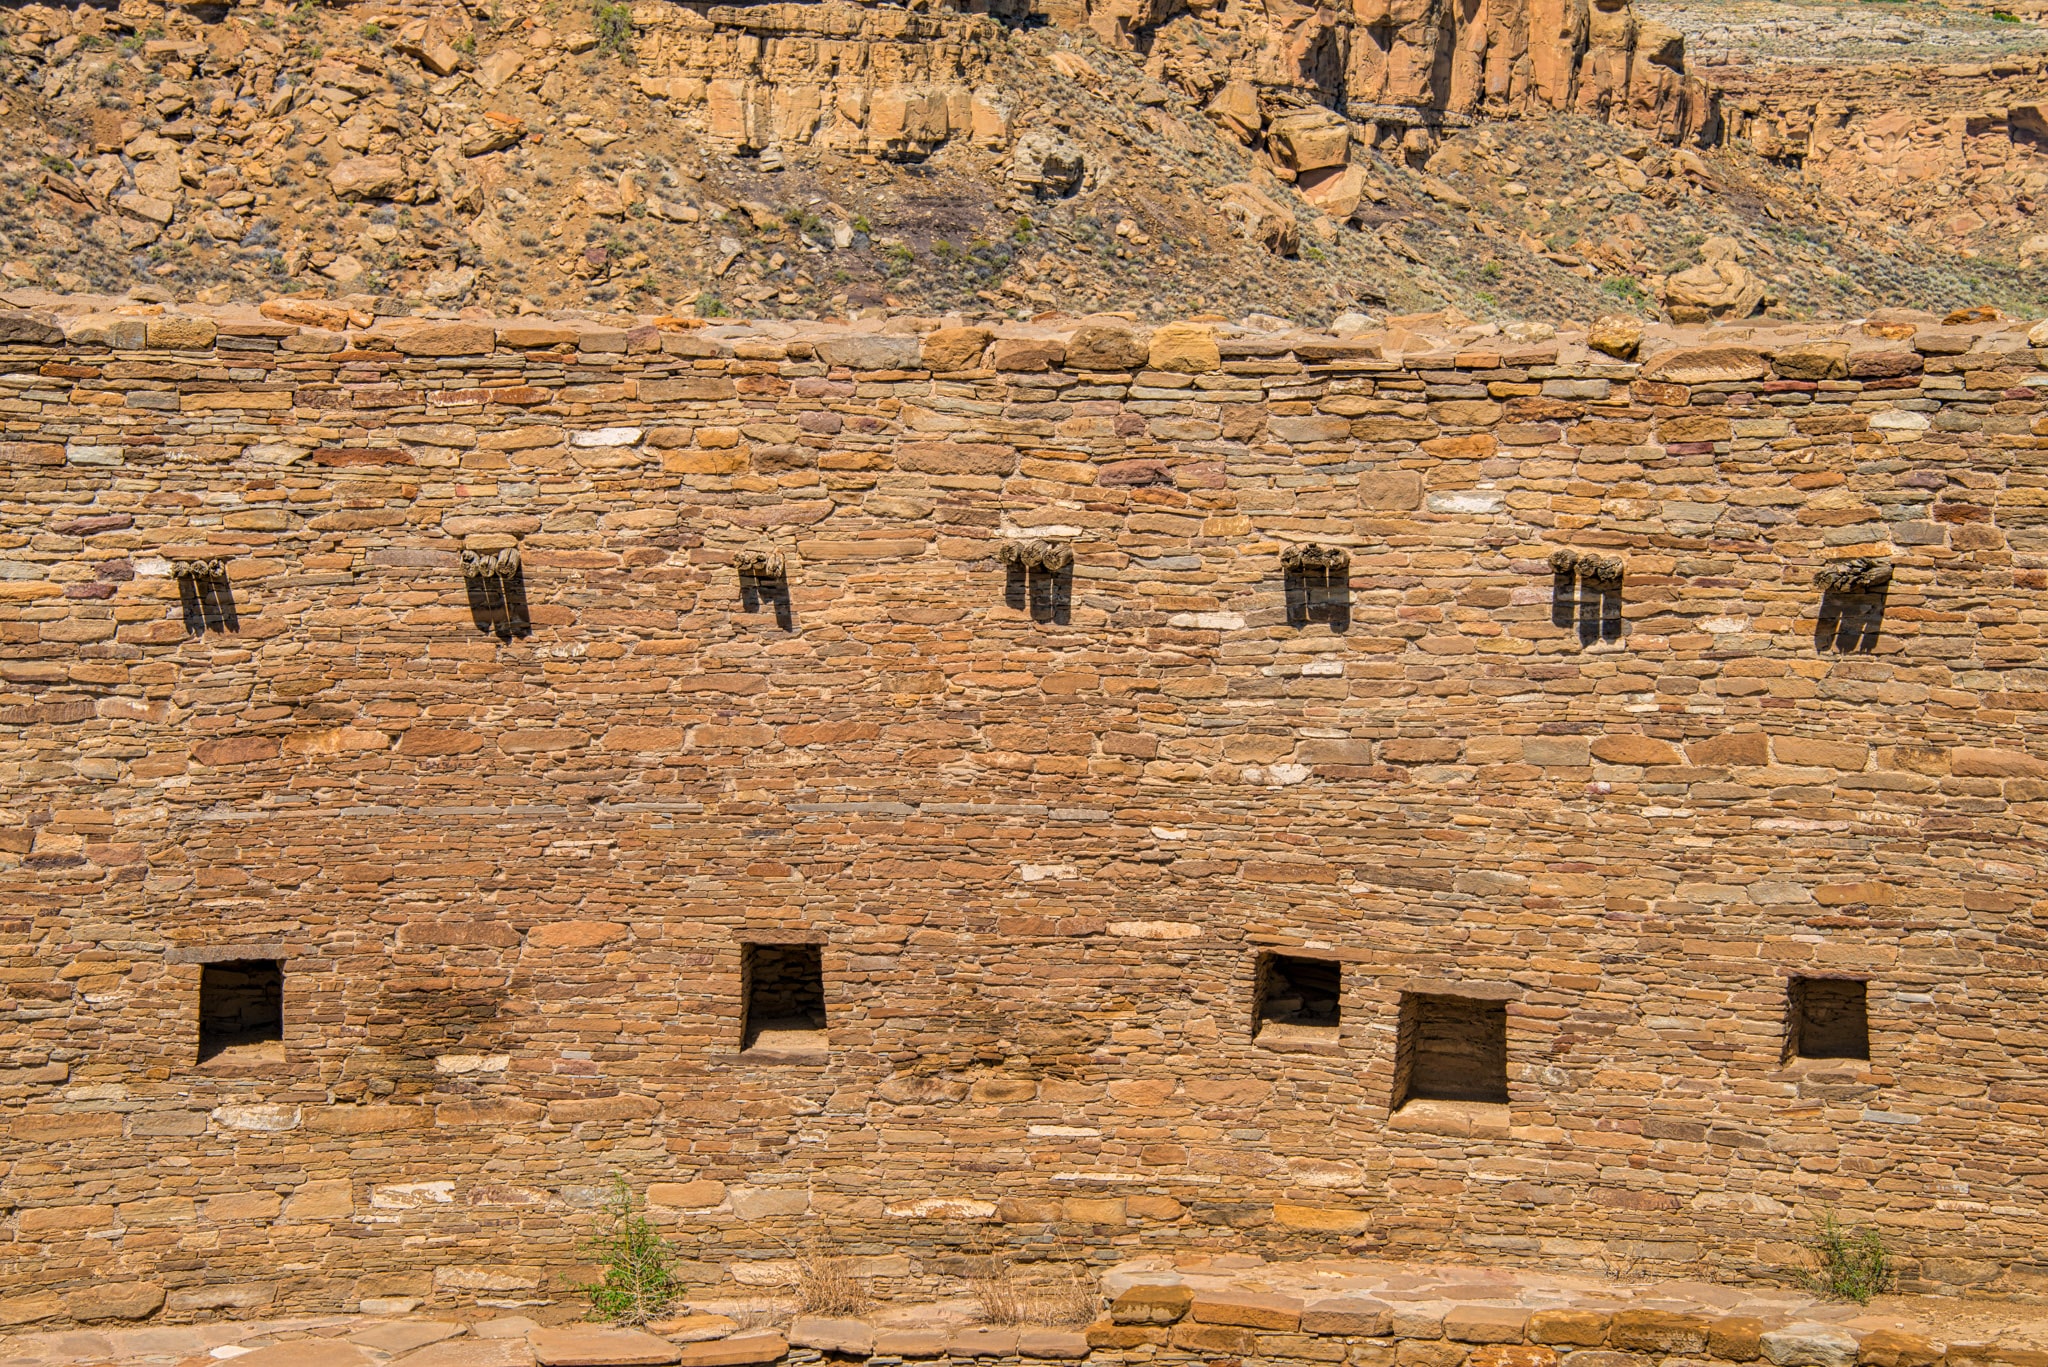 This is a detail of the south-facing interior wall of the Great Kiva at Casa Rinconada, across Chaco Wash from Pueblo Bonito in Chaco Canyon, New Mexico. Featured on the wall are vigas in groups of three and multiple niches. NCAR's High Altitude Observatory postulate that this slightly above-ground kiva was used for astromnomical observations and religeous ceremonies based on its orientation, location, and symmetry.